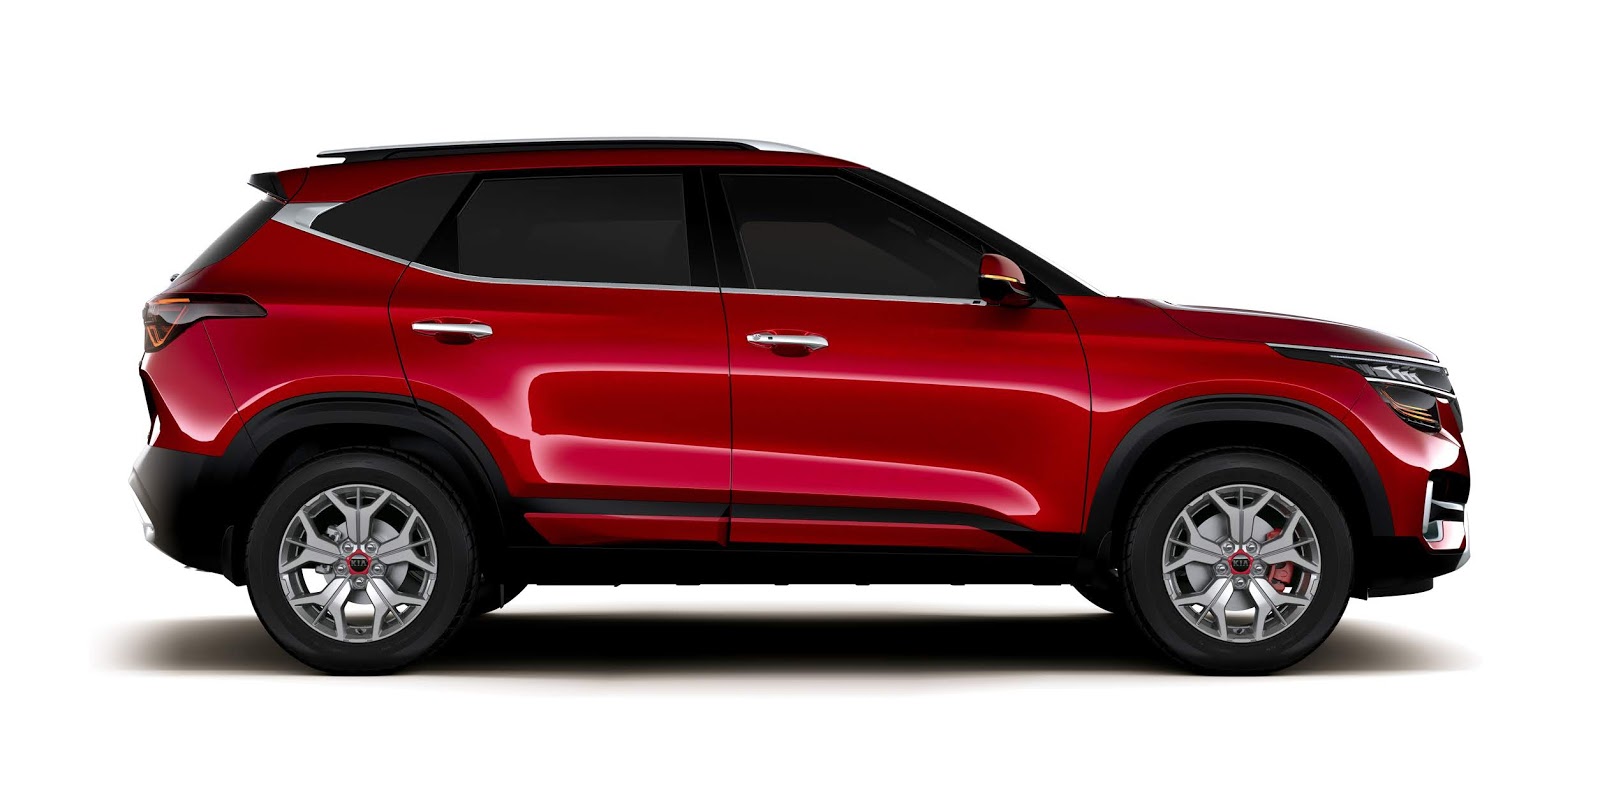 Kia Seltos Will Be Launched In India On 22nd August 2019 |VANDI4U